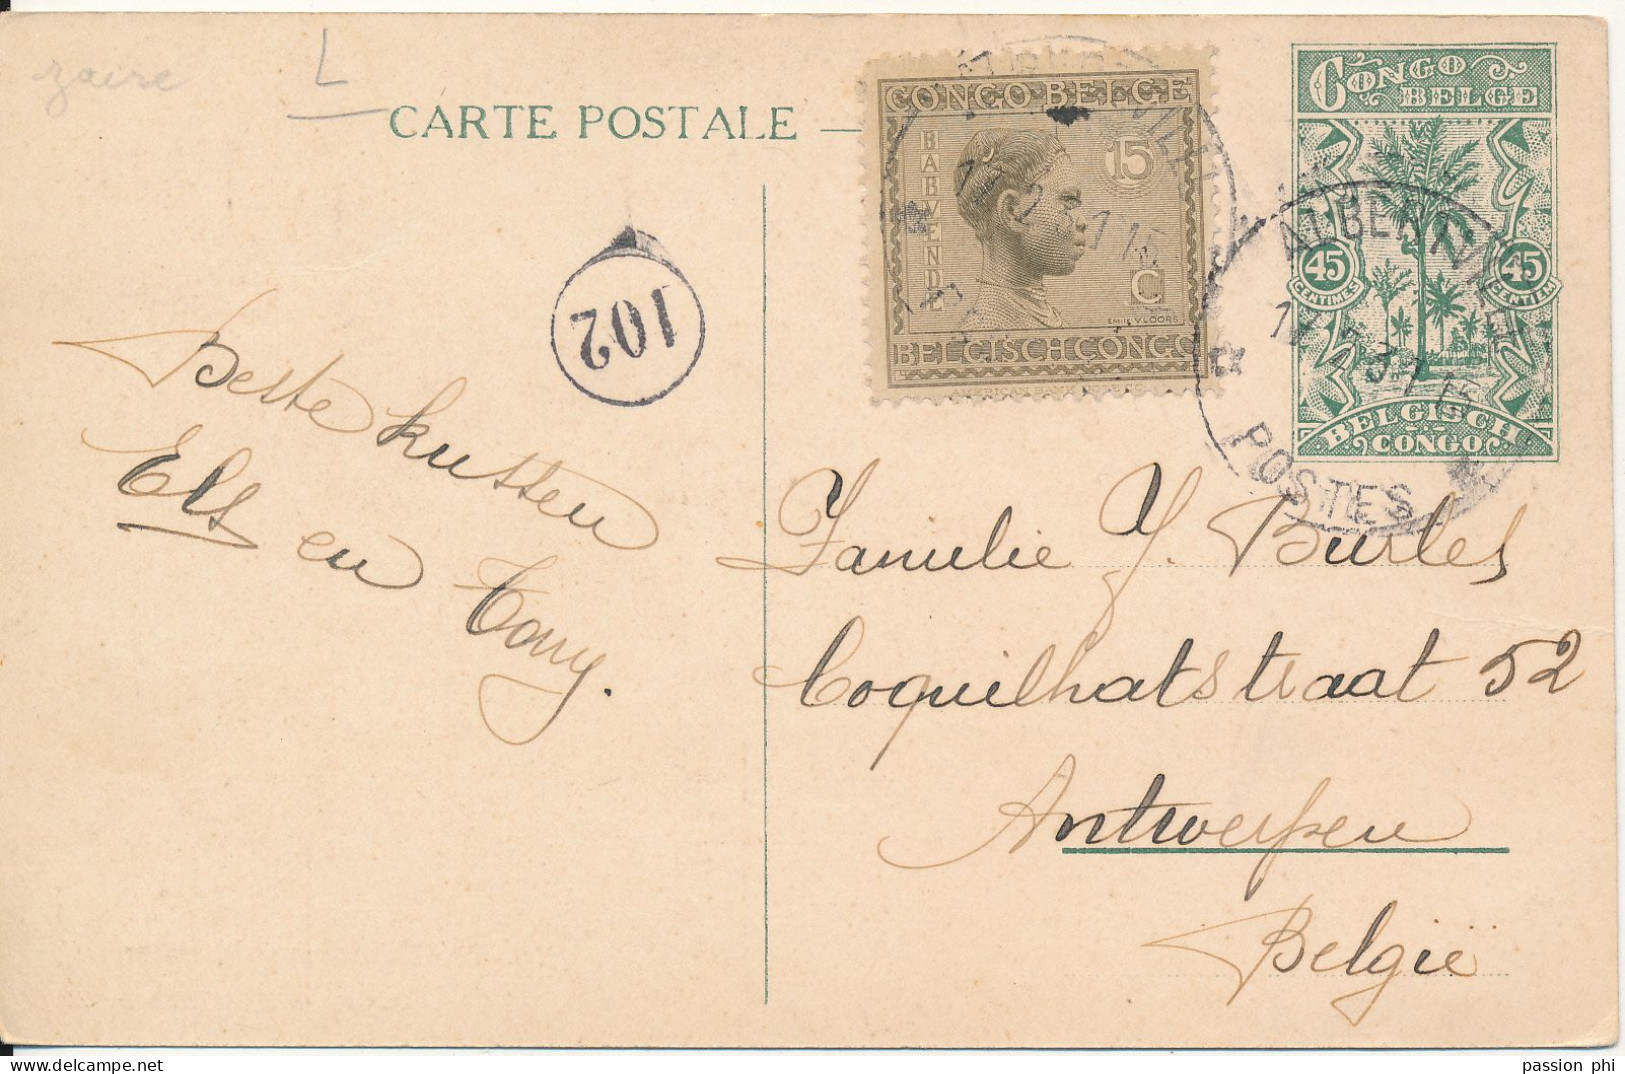 BELGIAN CONGO 1912 ISSUE PPS SBEP 66a VIEW 40 USED - Stamped Stationery